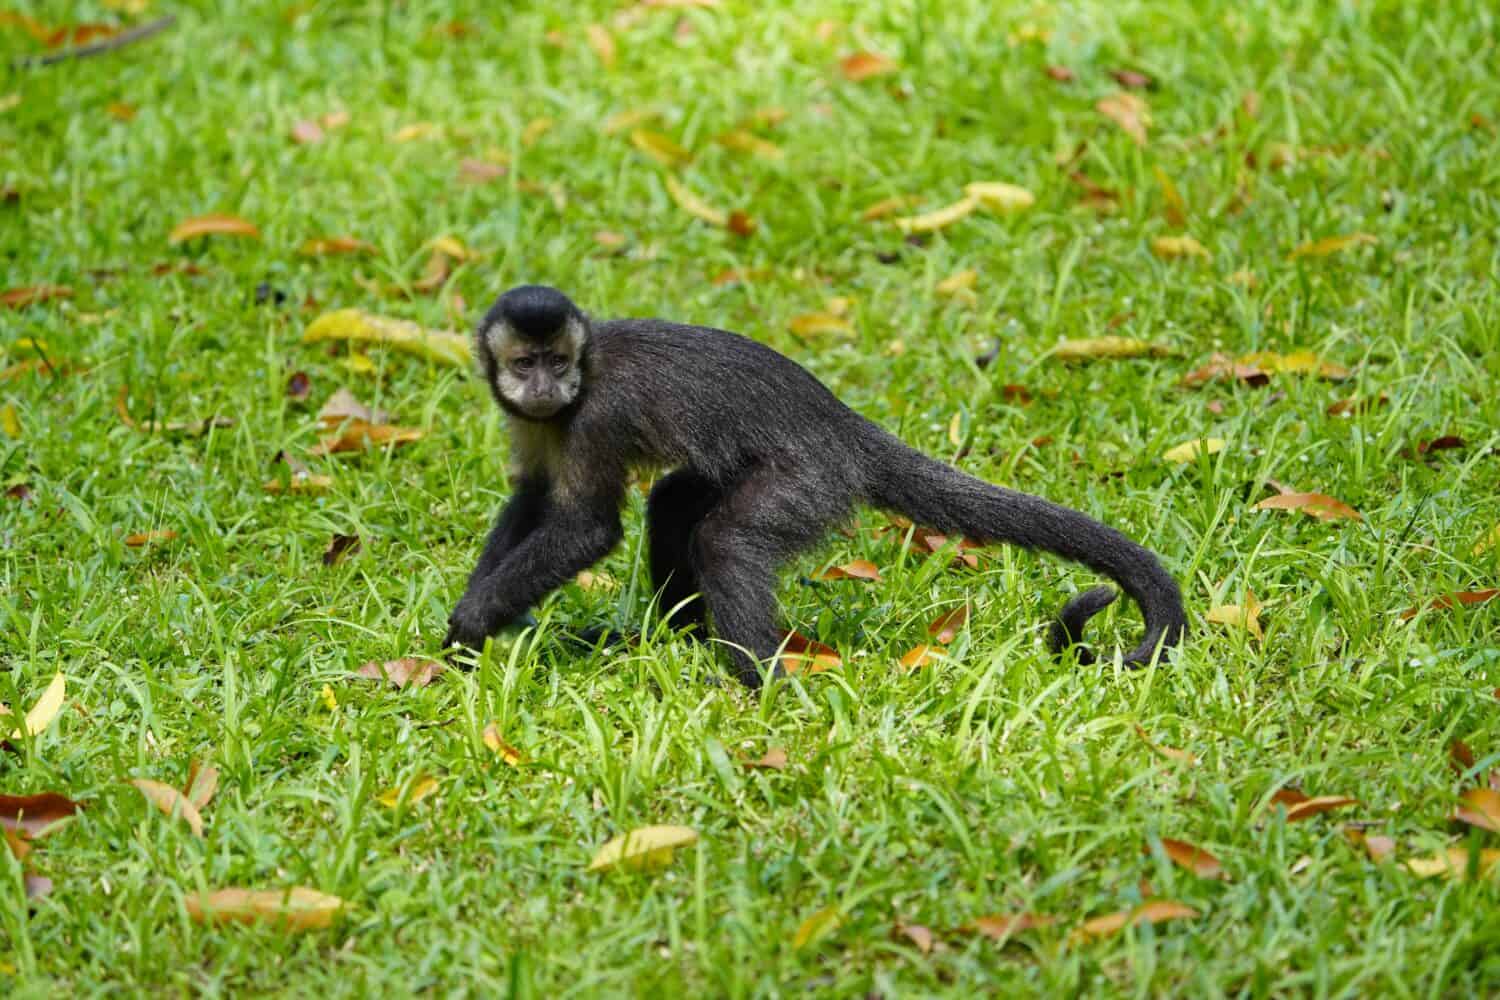 The black capuchin (Sapajus nigritus), also known as the black-horned capuchin, is a capuchin monkey from the Atlantic Forest in south-eastern Brazil and far north-eastern Argentina.